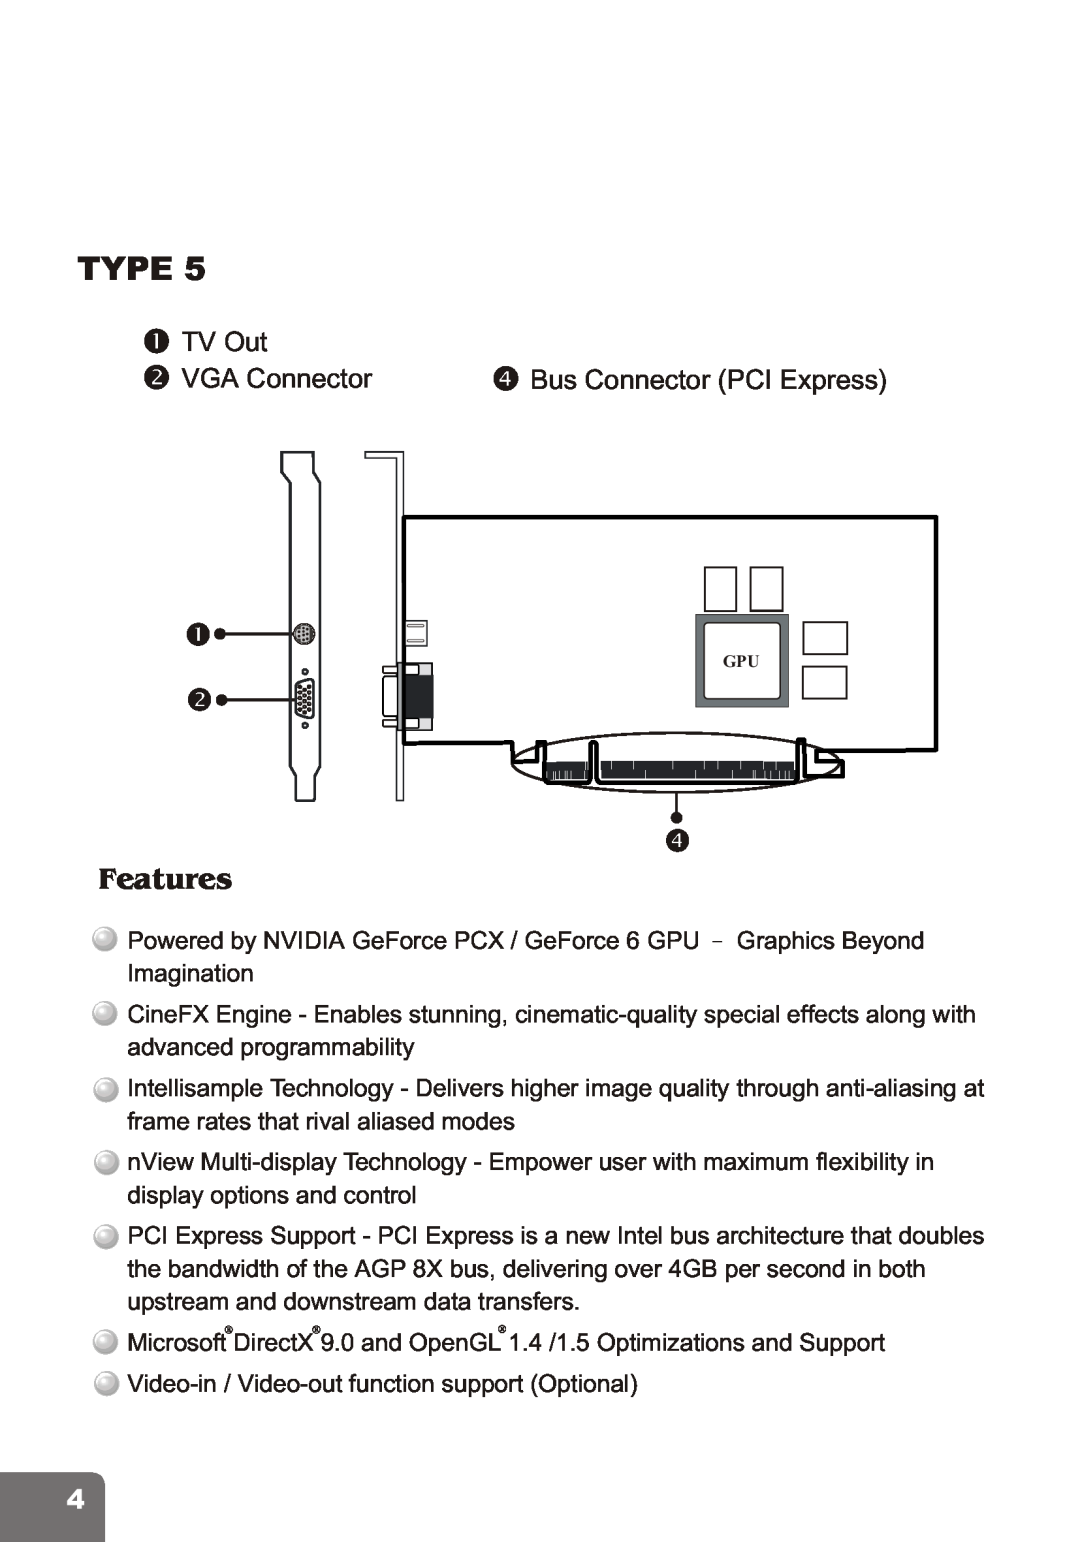 Nvidia PCI Express Series user manual Features, TV Out, Bus Connector PCI Express, Type, VGA Connector 